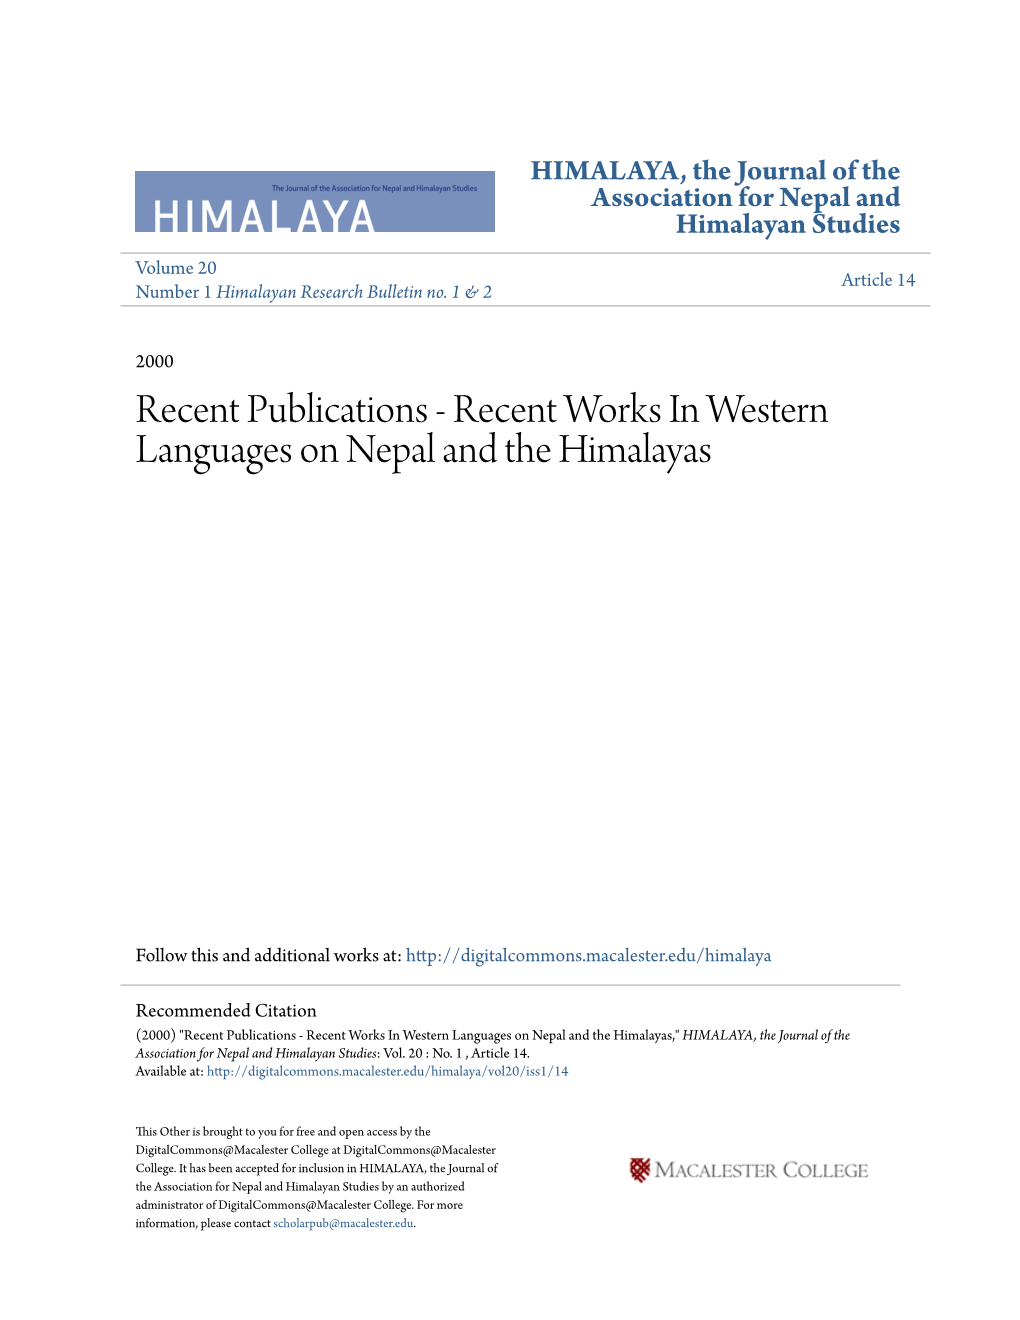 Recent Works in Western Languages on Nepal and the Himalayas